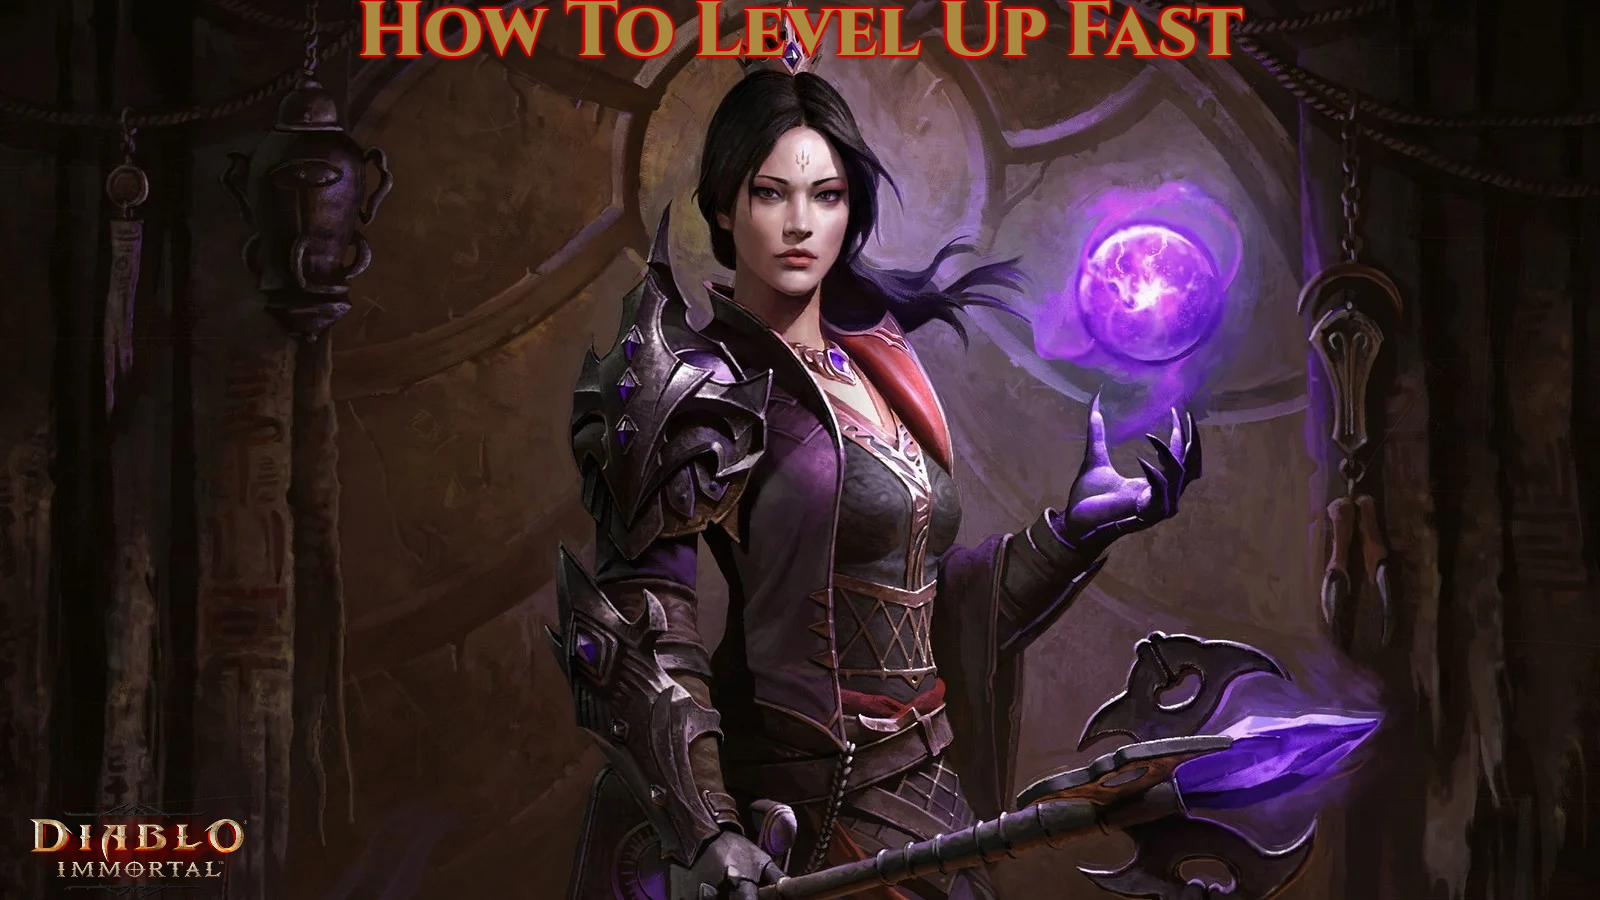 You are currently viewing Diablo Immortal How To Level Up Fast